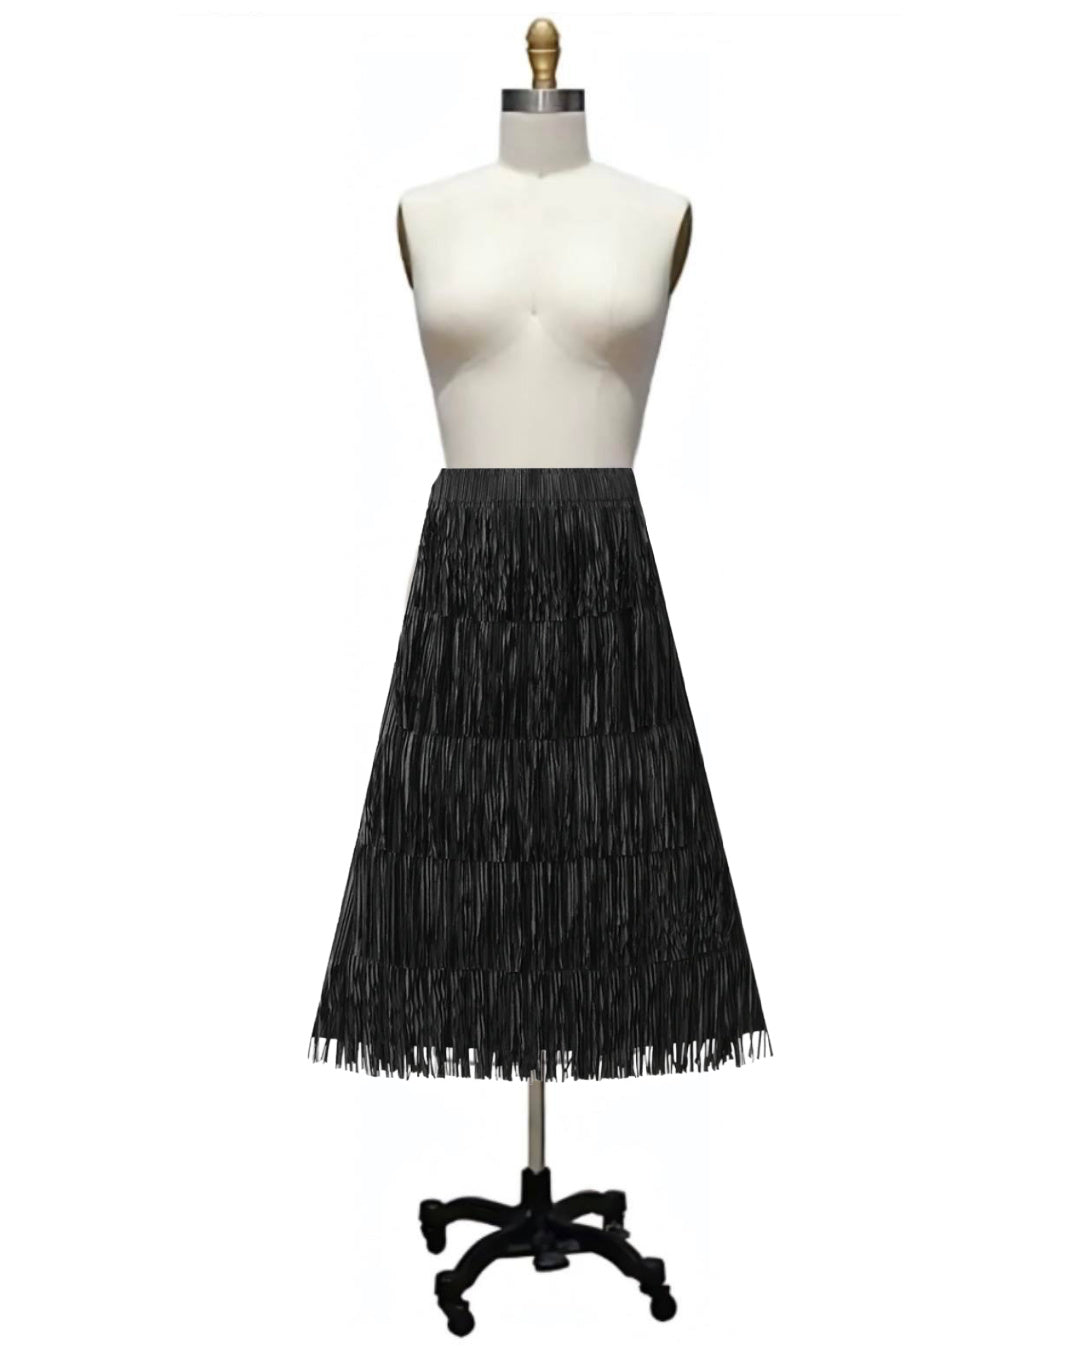 Infringed- the Tiered Fringed Midi Length Skirt 10 Colors